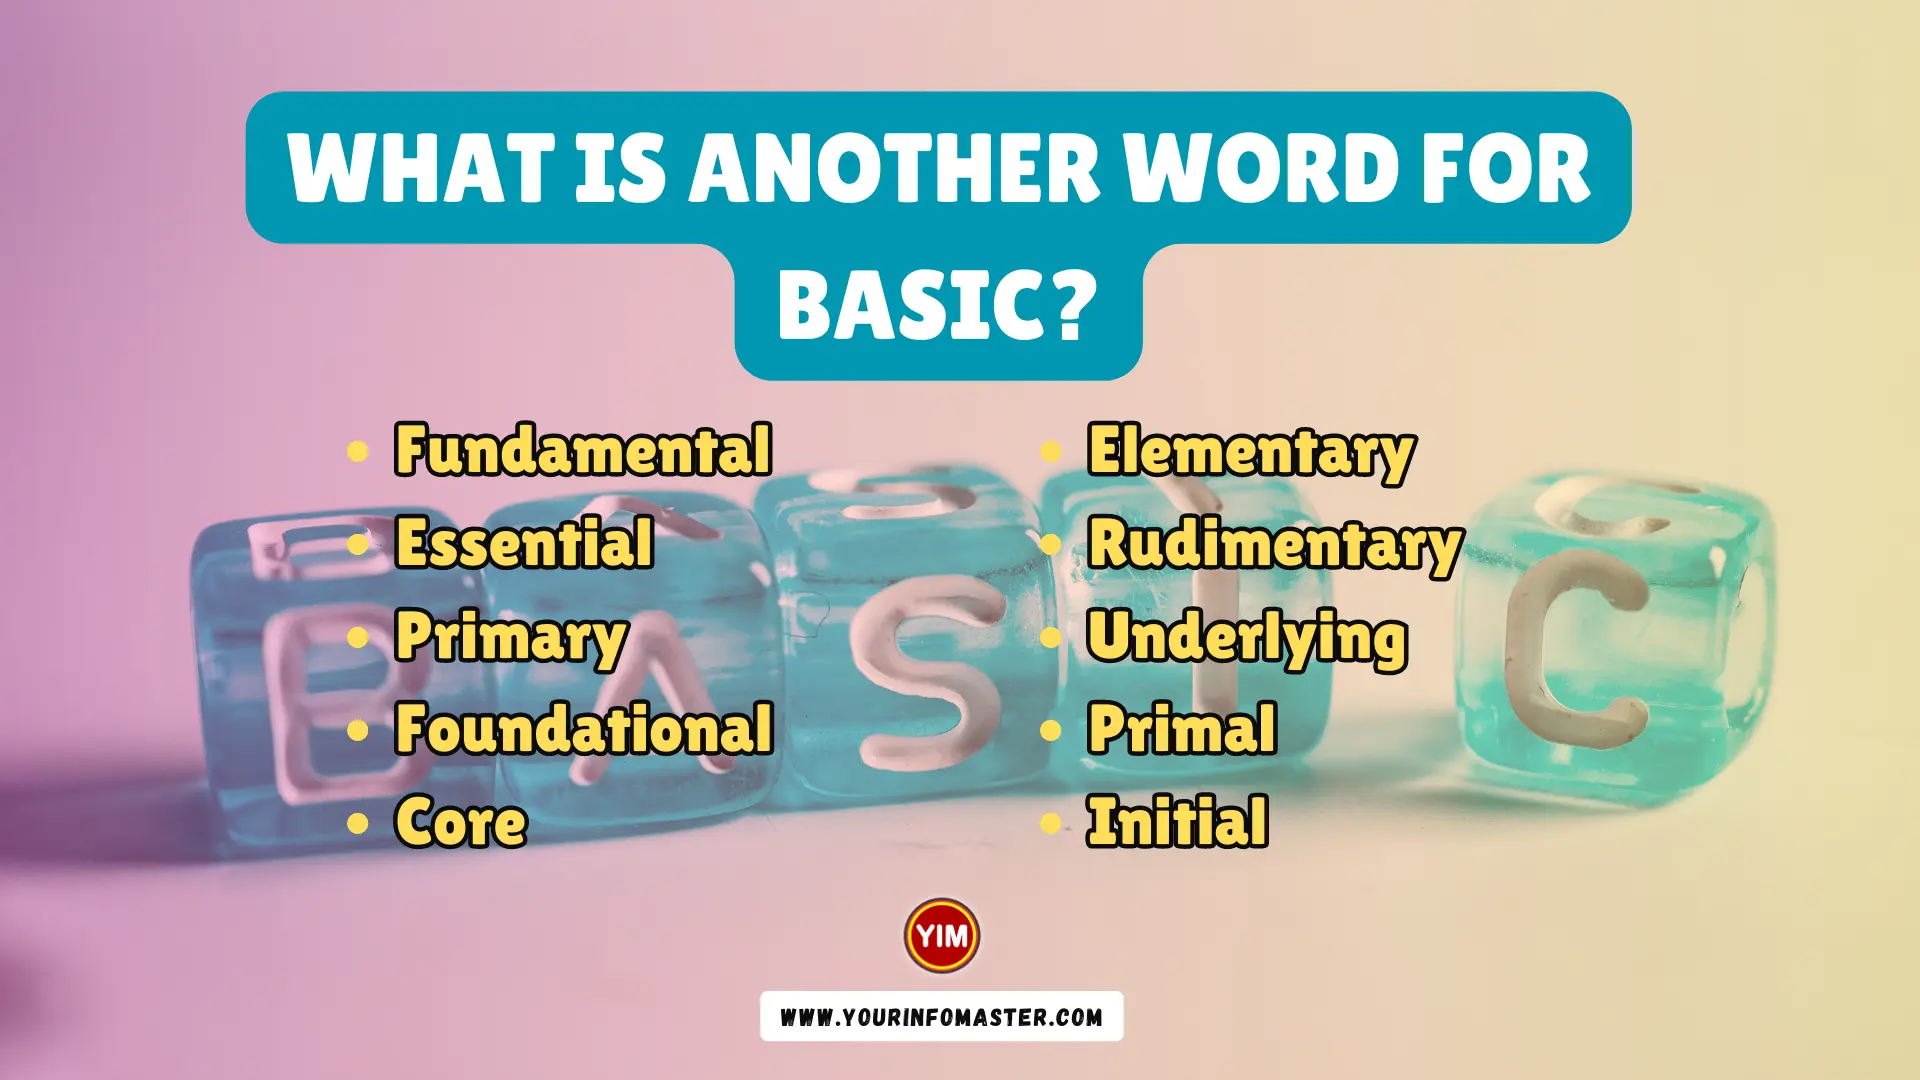 What is another word for Basic